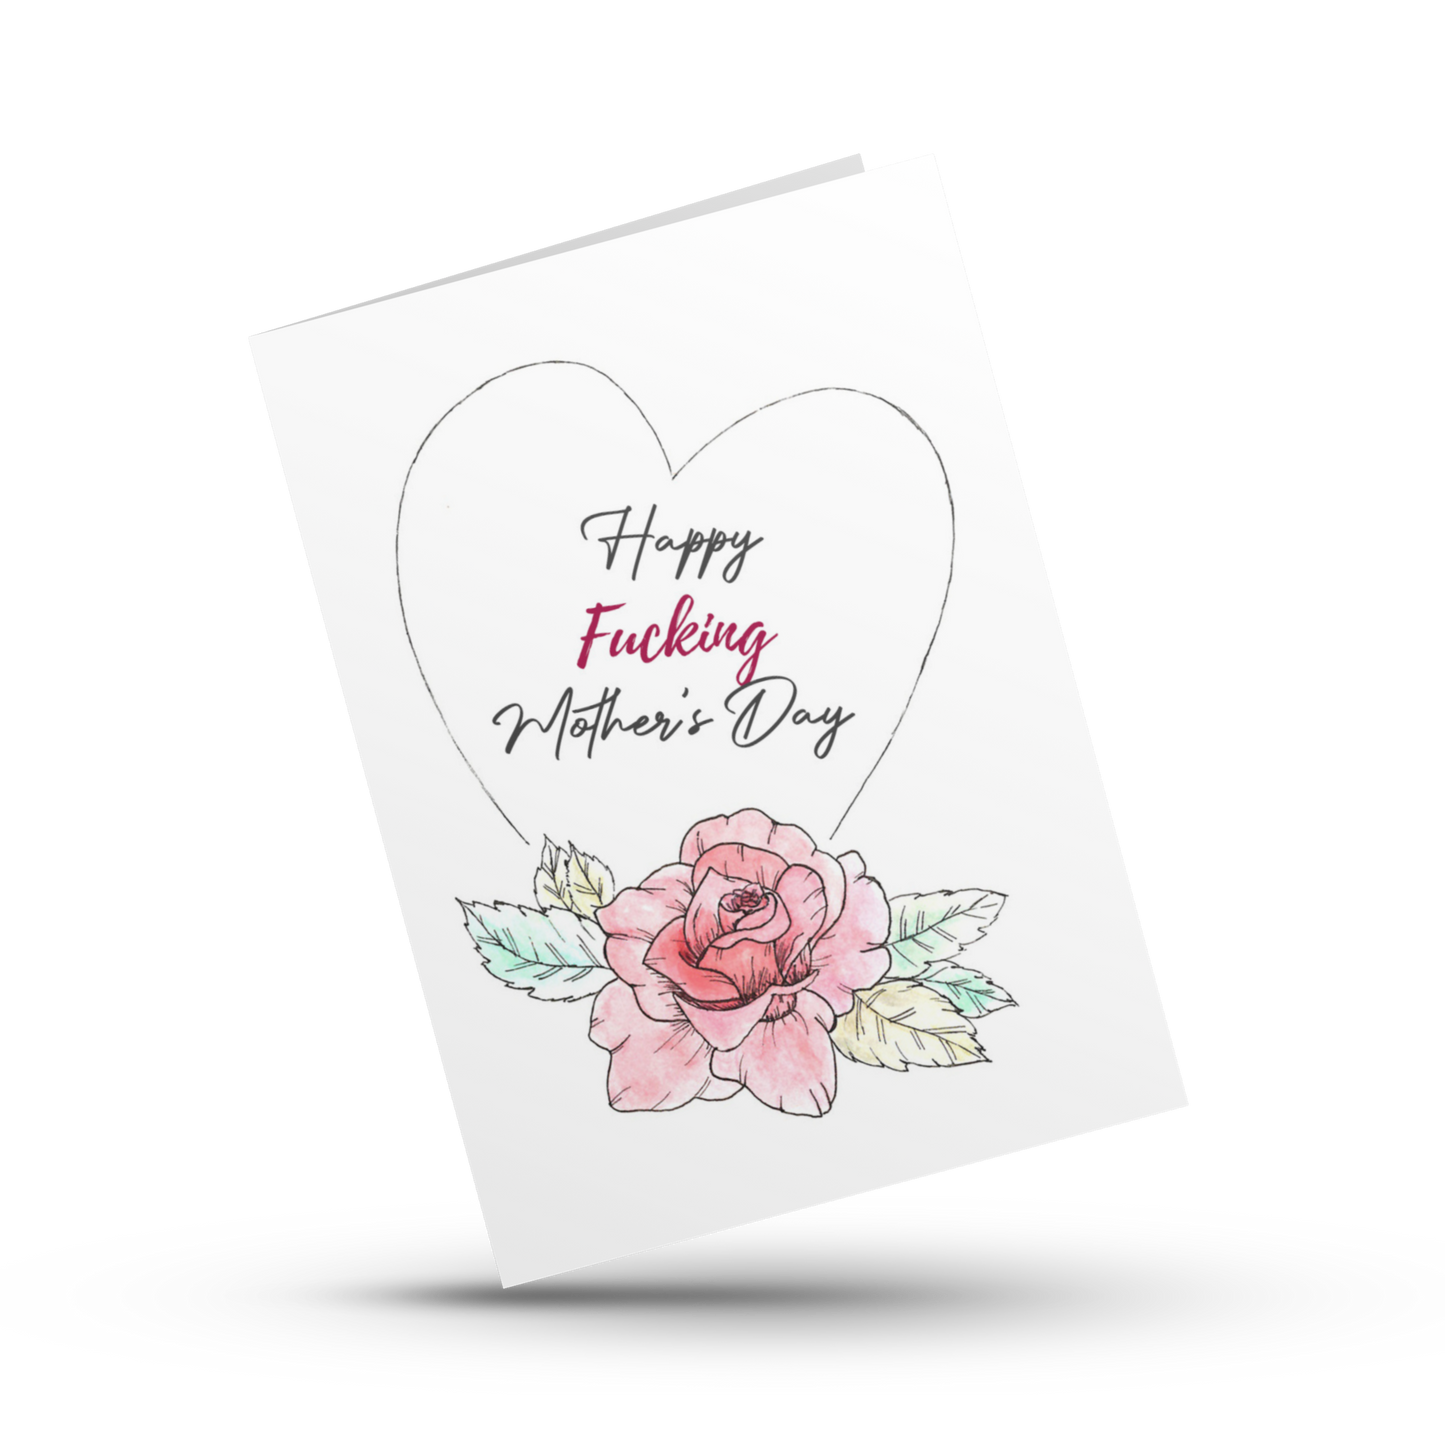 Happy fucking mother's day, Mother's day card, Sweary card, Cute cuss card for mom, Funny Mother's day card for wife, Card for bestie mom